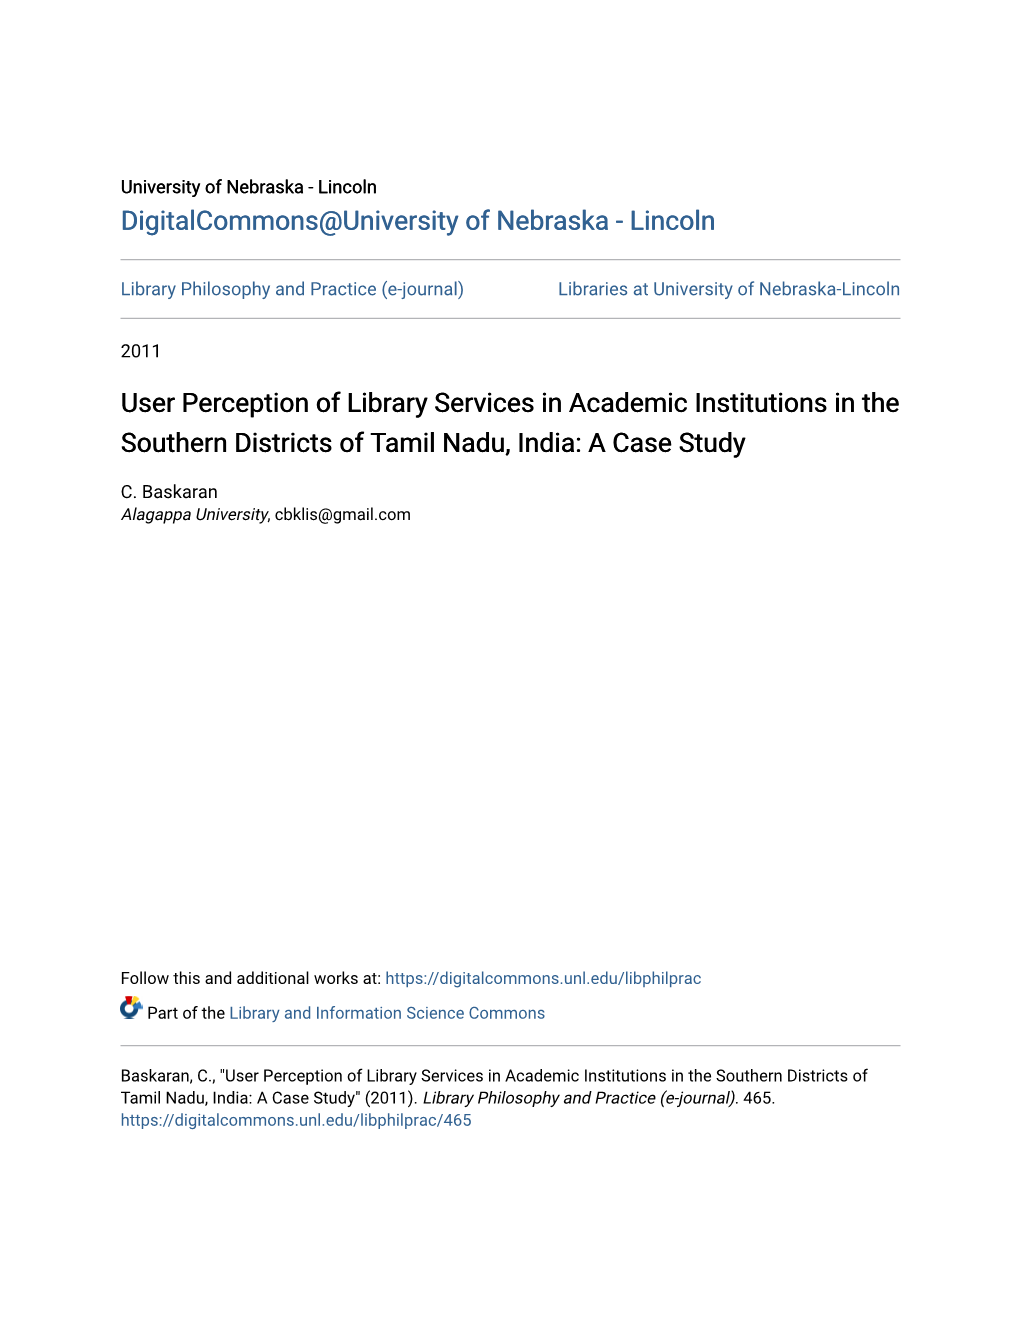 User Perception of Library Services in Academic Institutions in the Southern Districts of Tamil Nadu, India: a Case Study